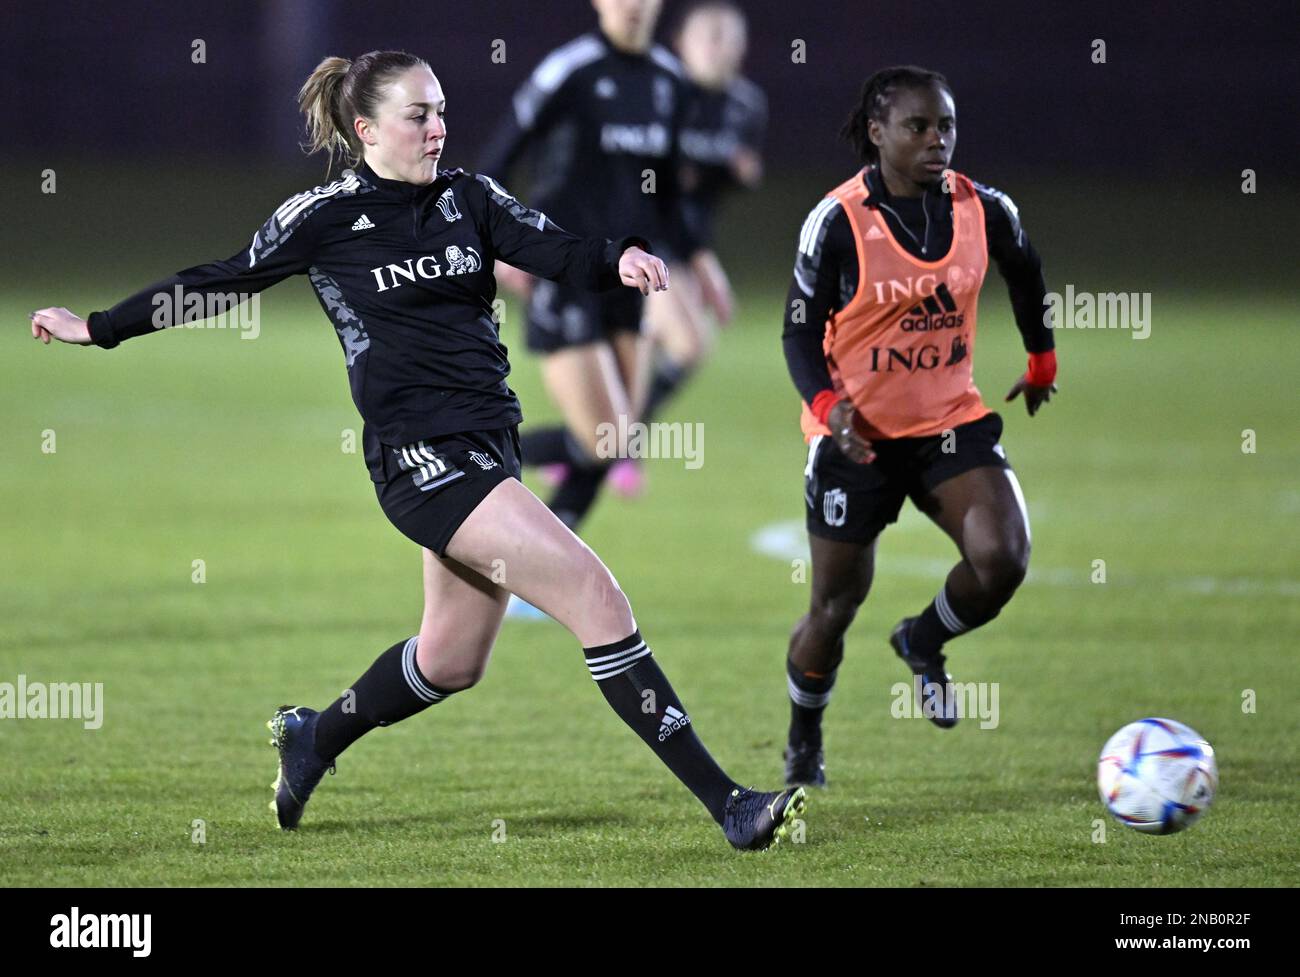 Illustration picture taken during a training session of Belgium's national women's soccer team the Red Flames, in Tubize, Monday 13 February 2023. The Red Flames are participating in the Arnold Clark Cup, an invitational women's association football tournament, from 16 to 22 February 2023. BELGA PHOTO ERIC LALMAND Stock Photo